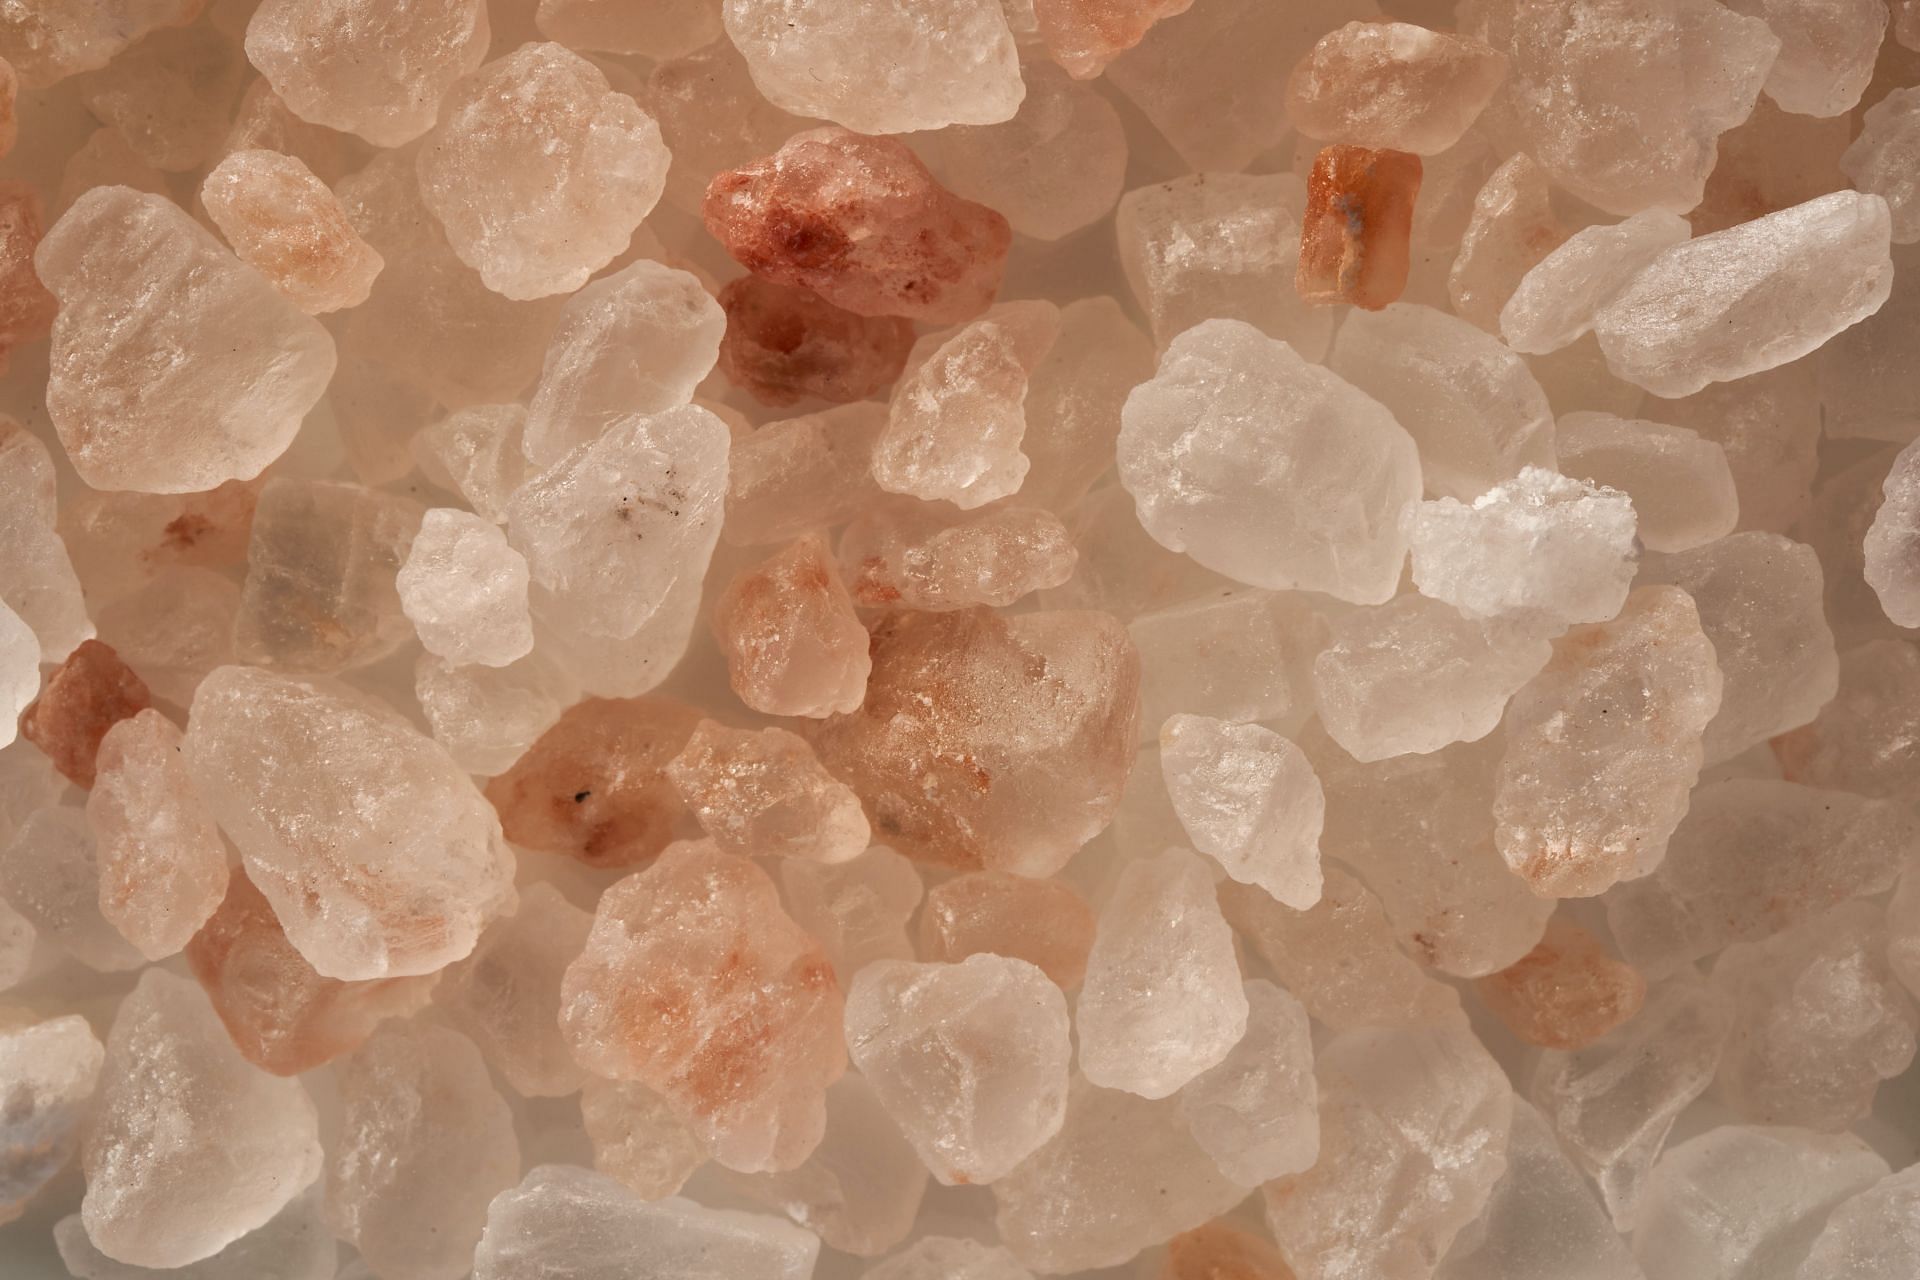 Using a high-quality or himalayan salt is important. (Image via Unsplash / Wolfgang Hasselmann)